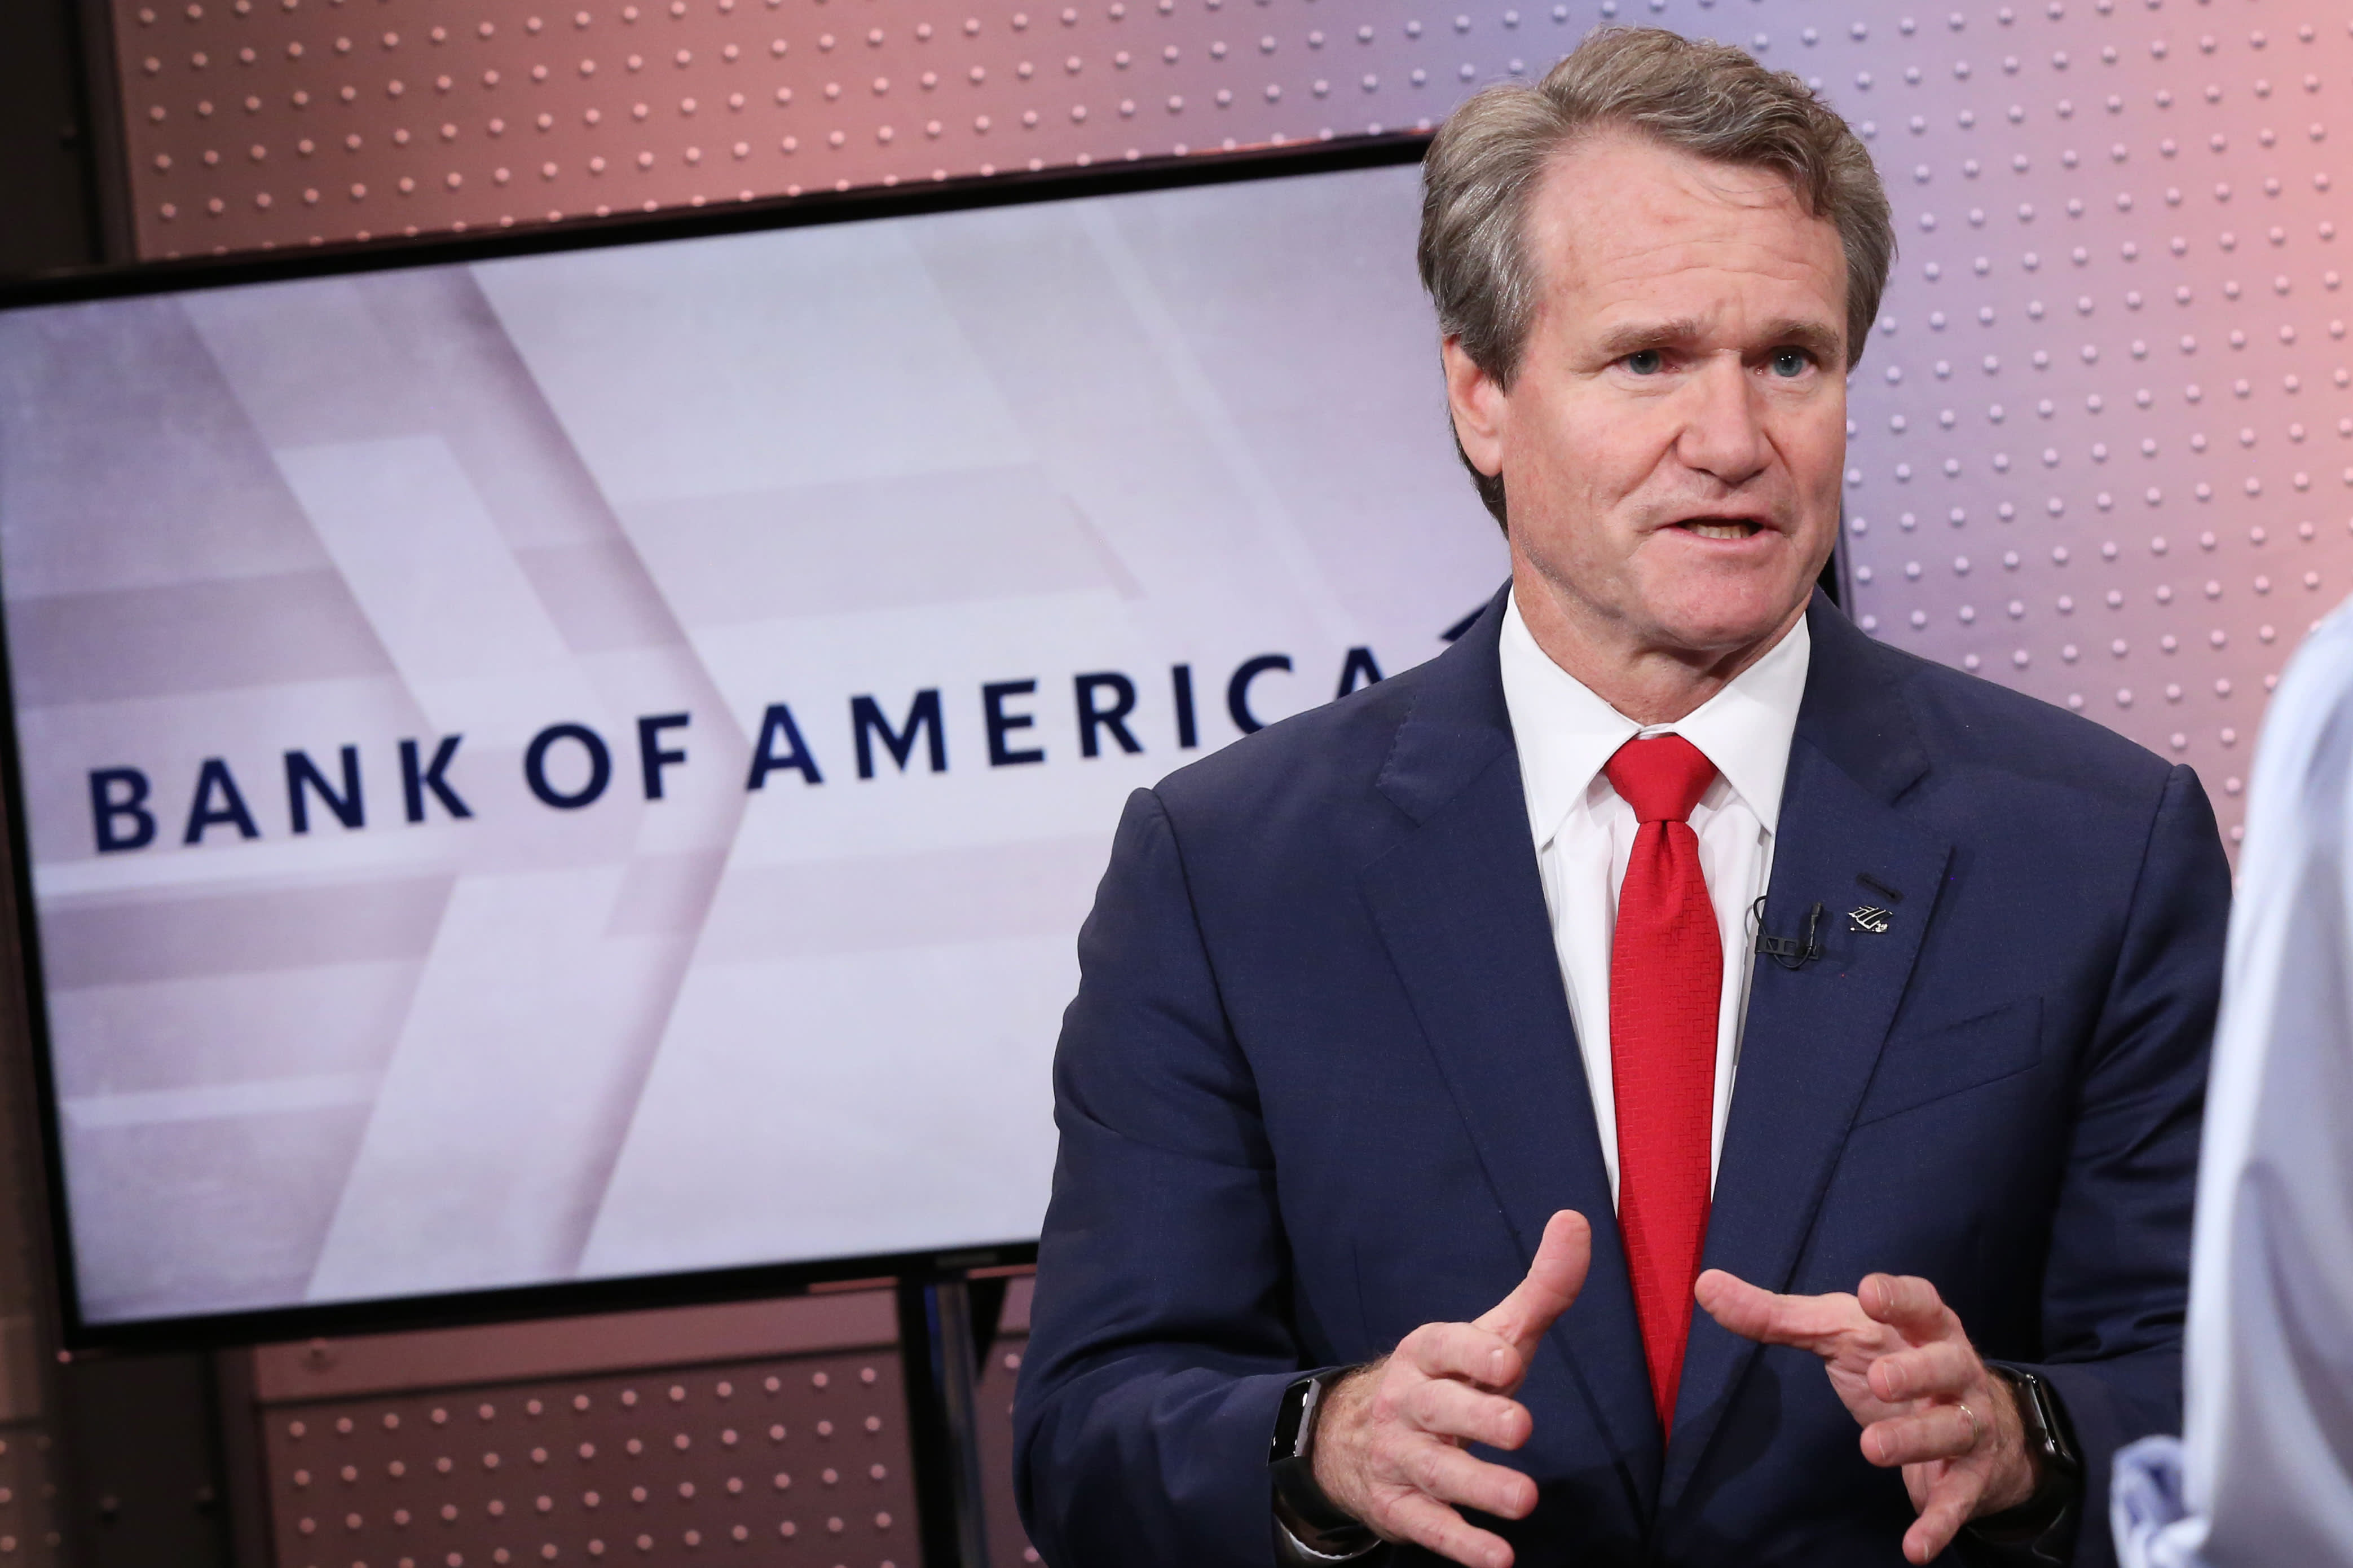 Bank of America spends over  billion per year on cybersecurity, CEO Brian Moynihan says